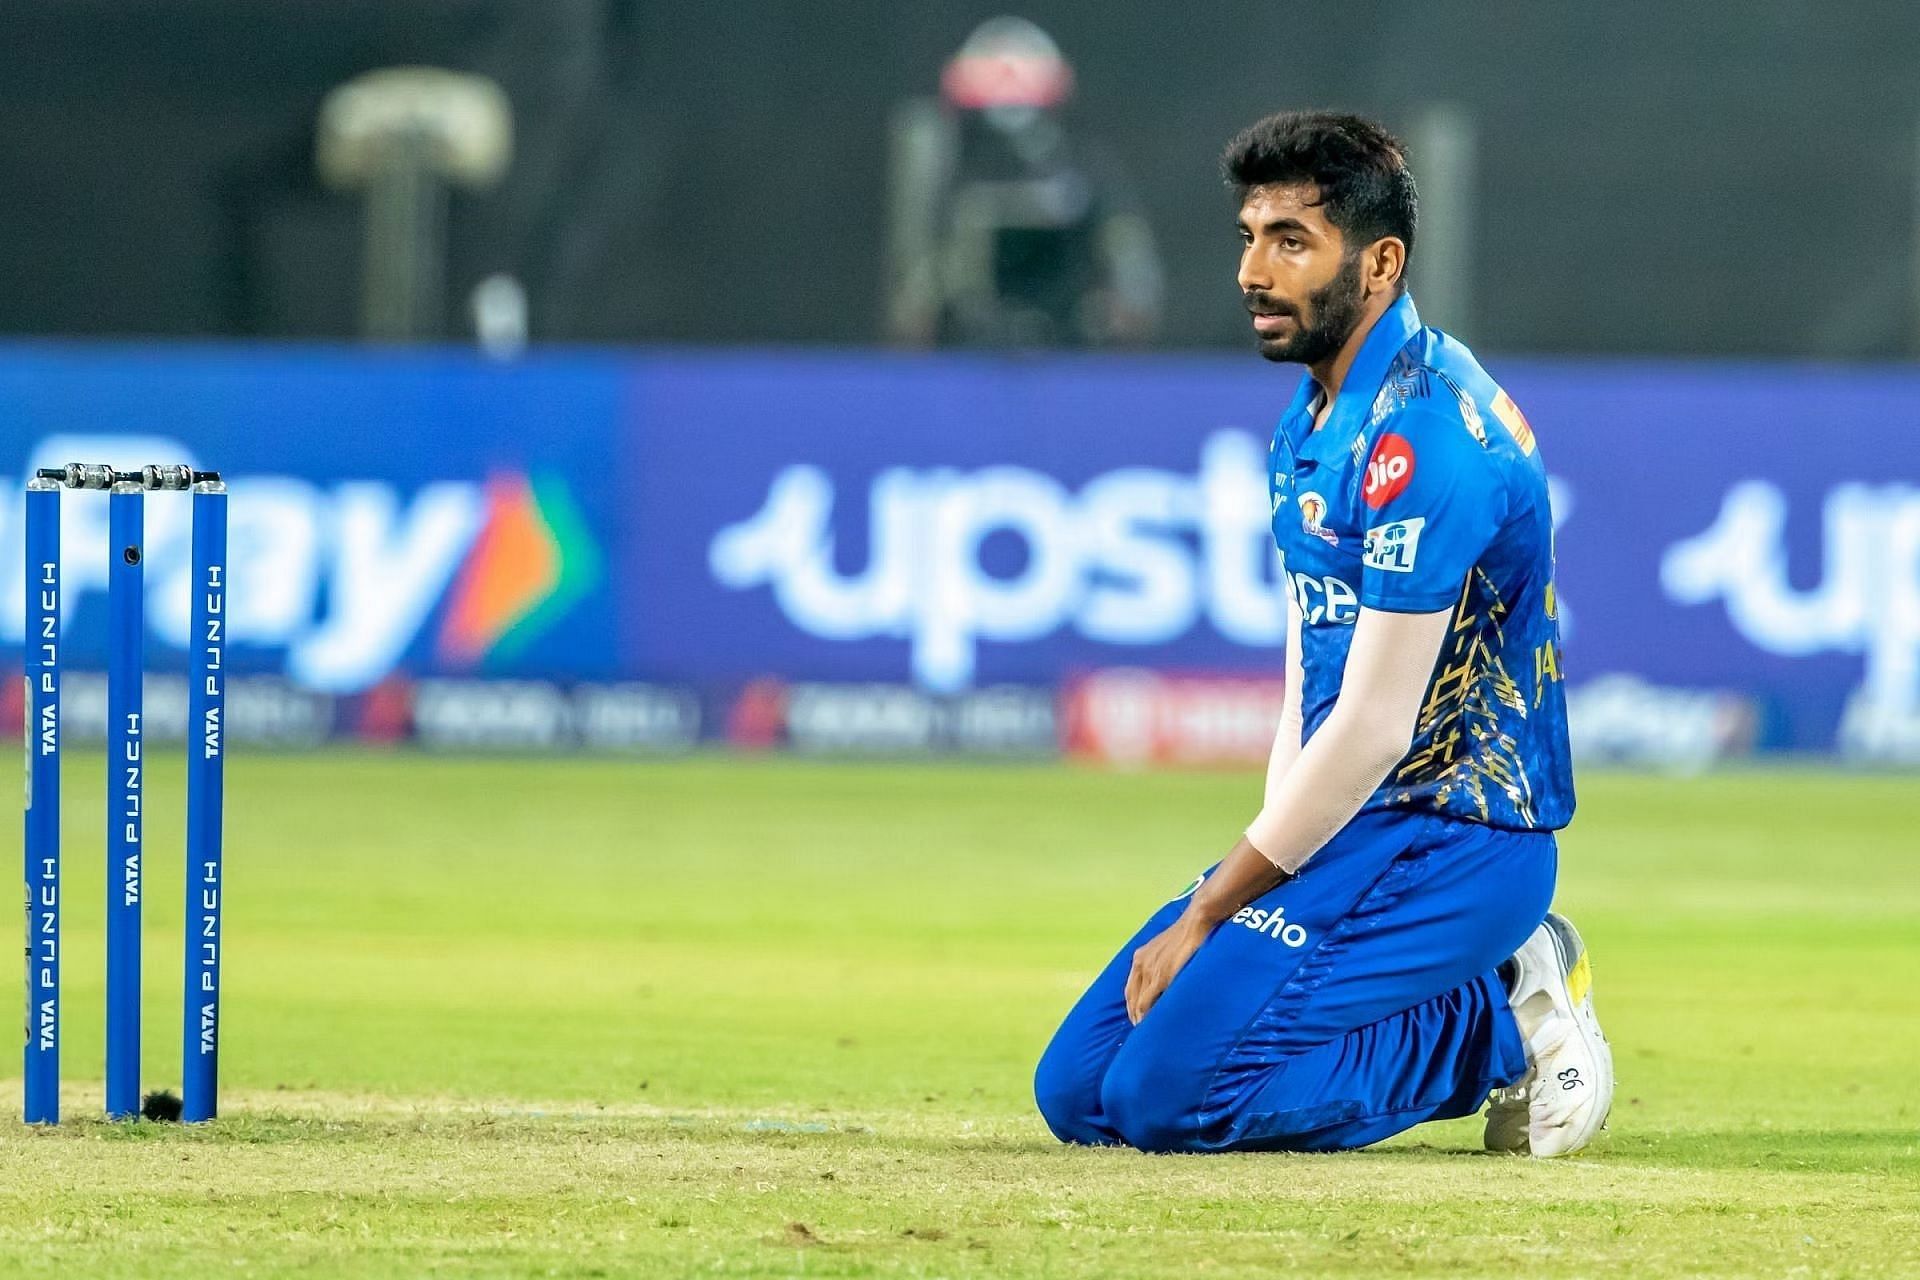 Jasprit Bumrah was ruled out of IPL 2023 due to a back injury. [P/C: iplt20.com]